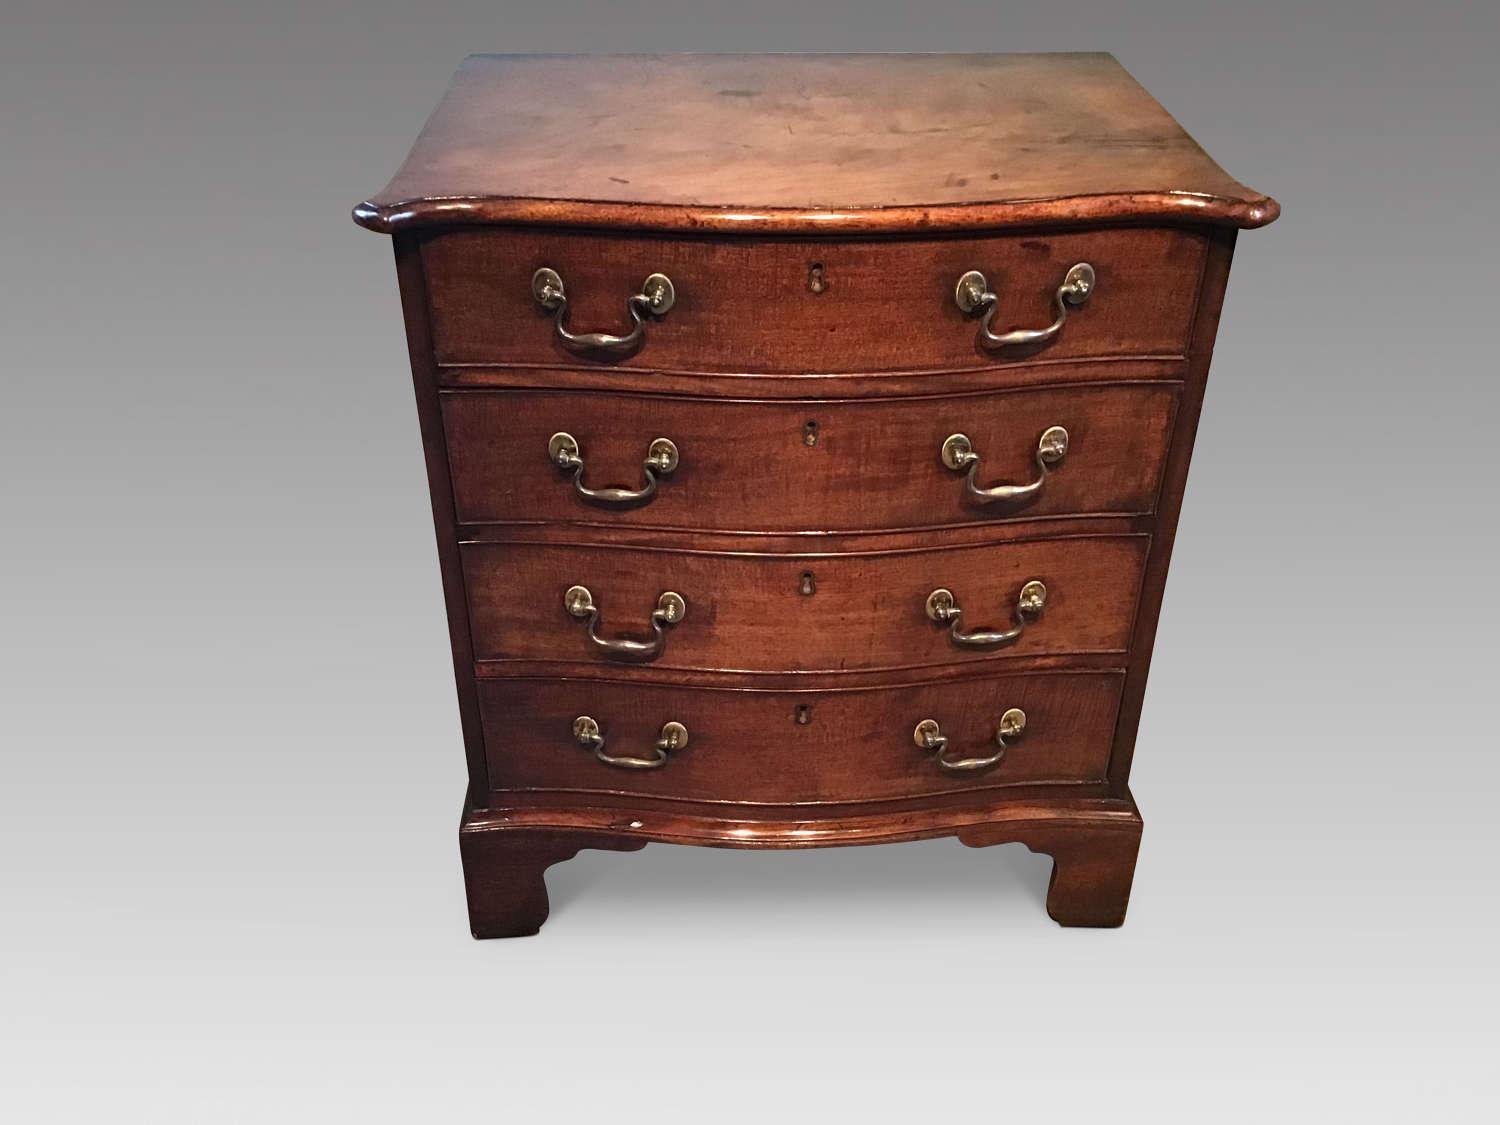 Antique mahogany serpentine chest of drawers